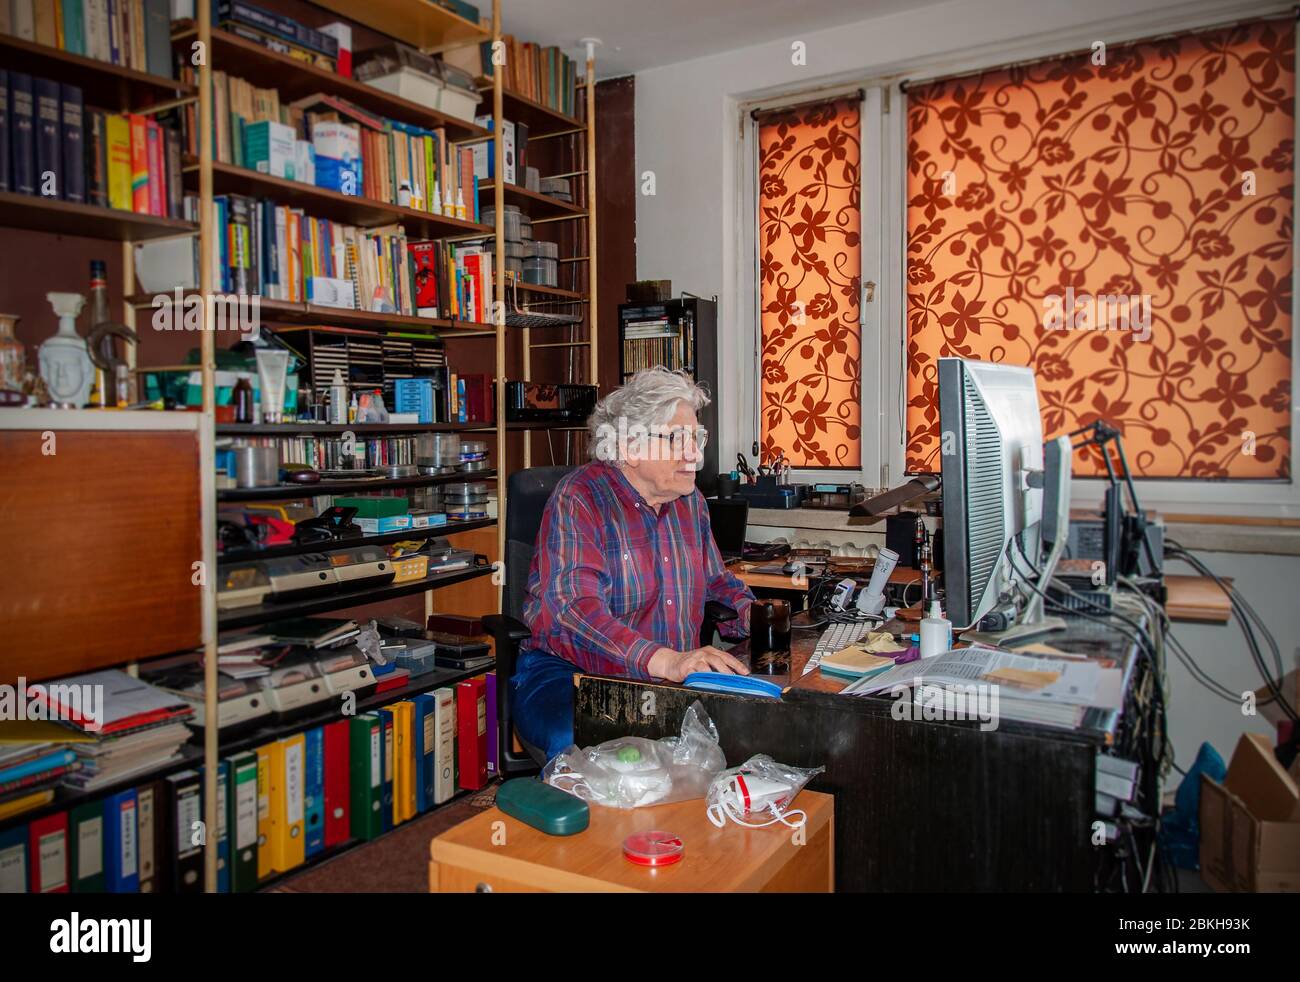 Elderly white haired man working at home on the desktop computer in a mess. Bookshelf with many books and antiviral masks ready Stock Photo